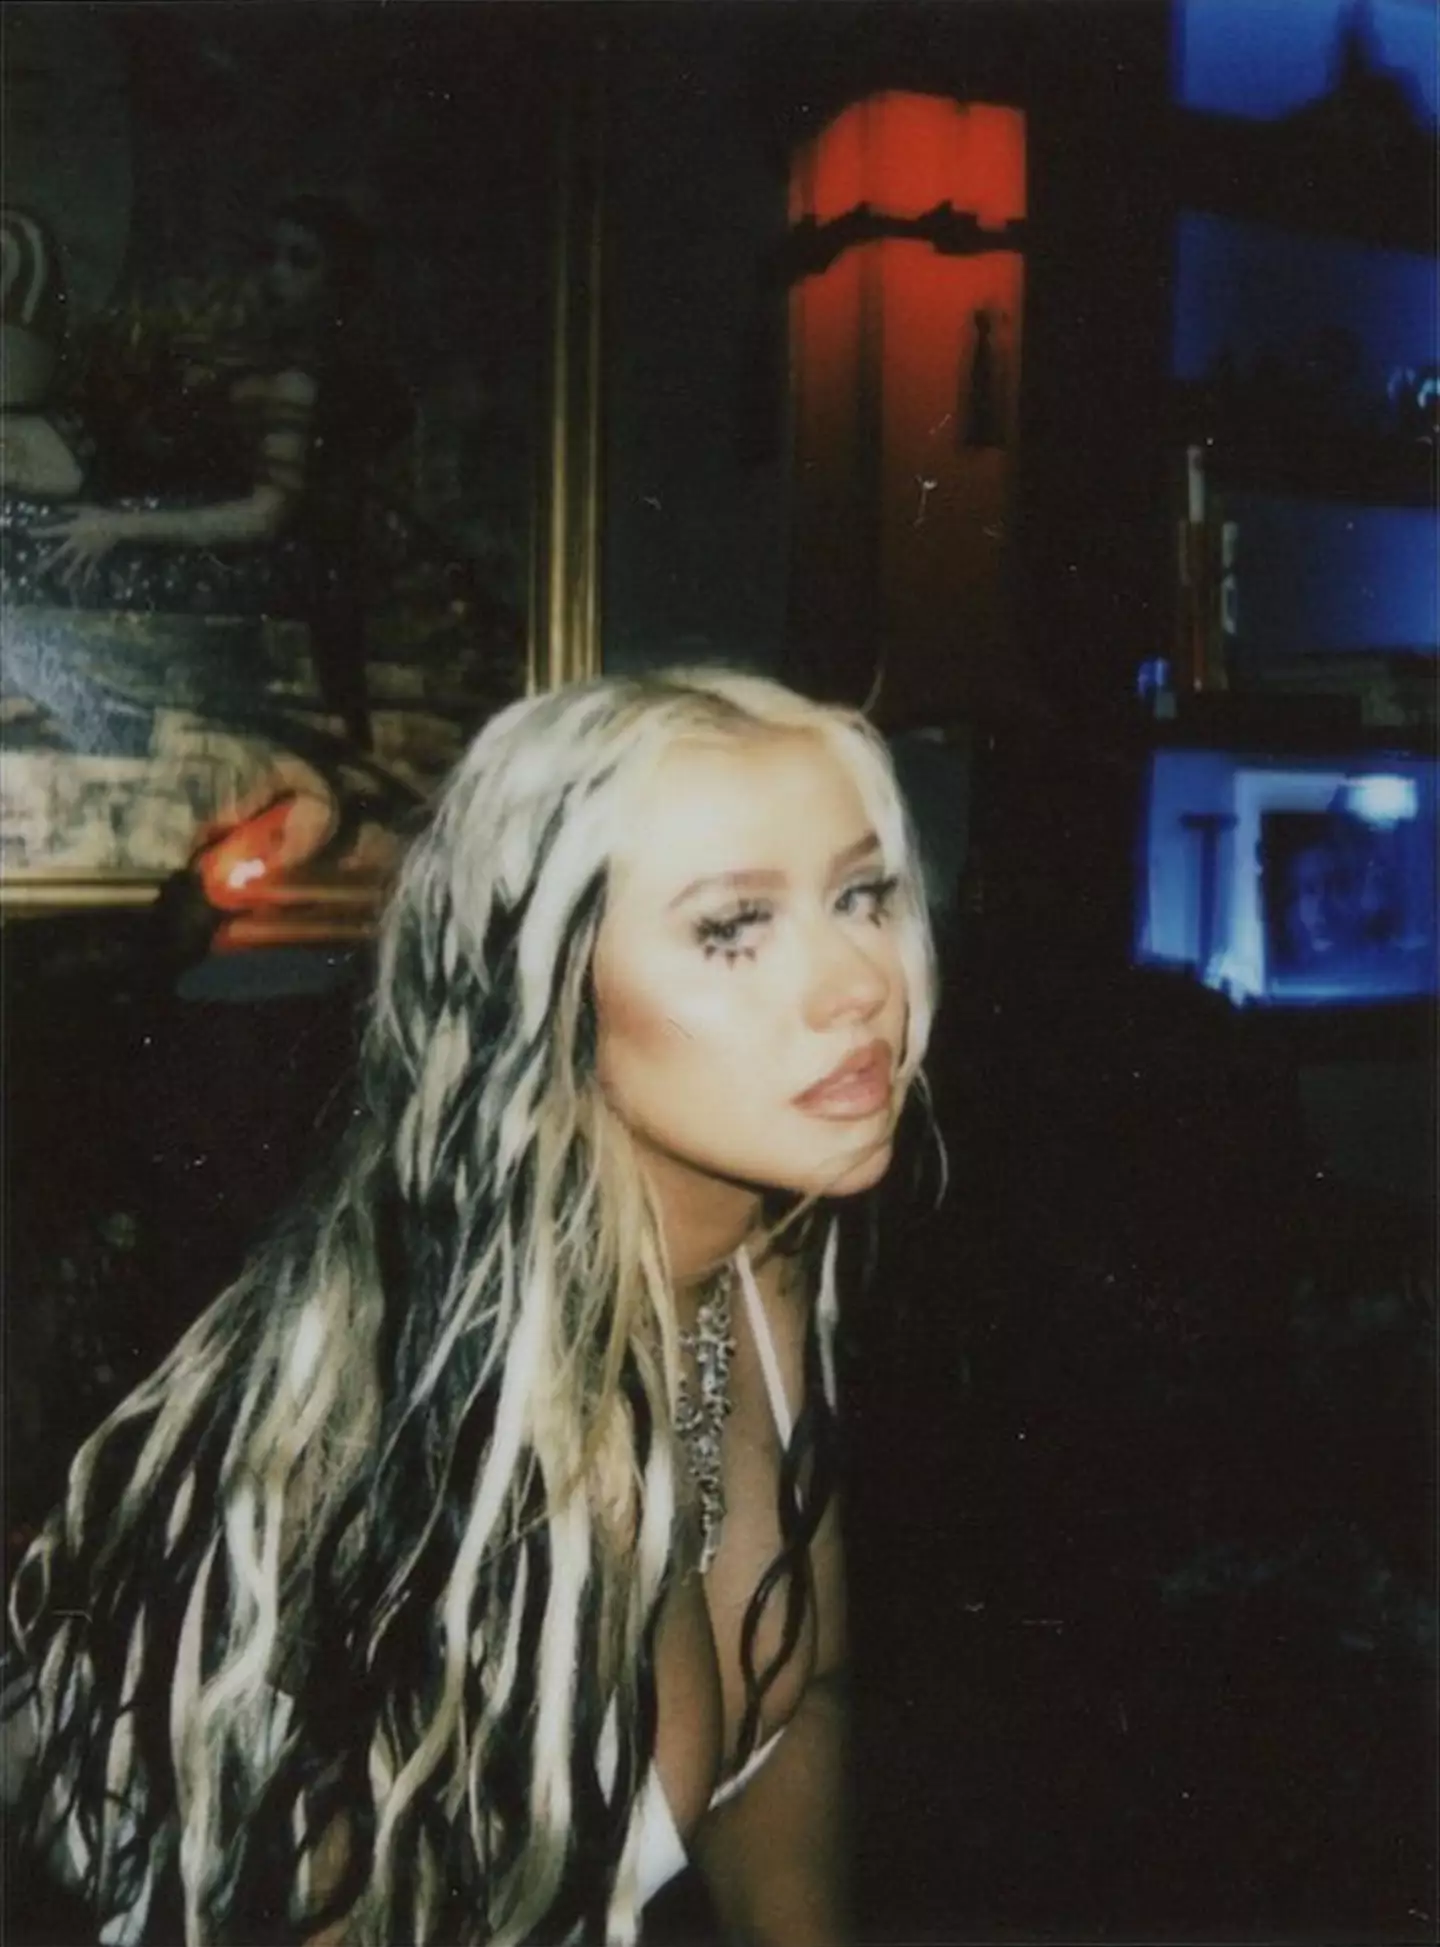 Xtina also spoke about the double standards she faced on her 2003 tour.